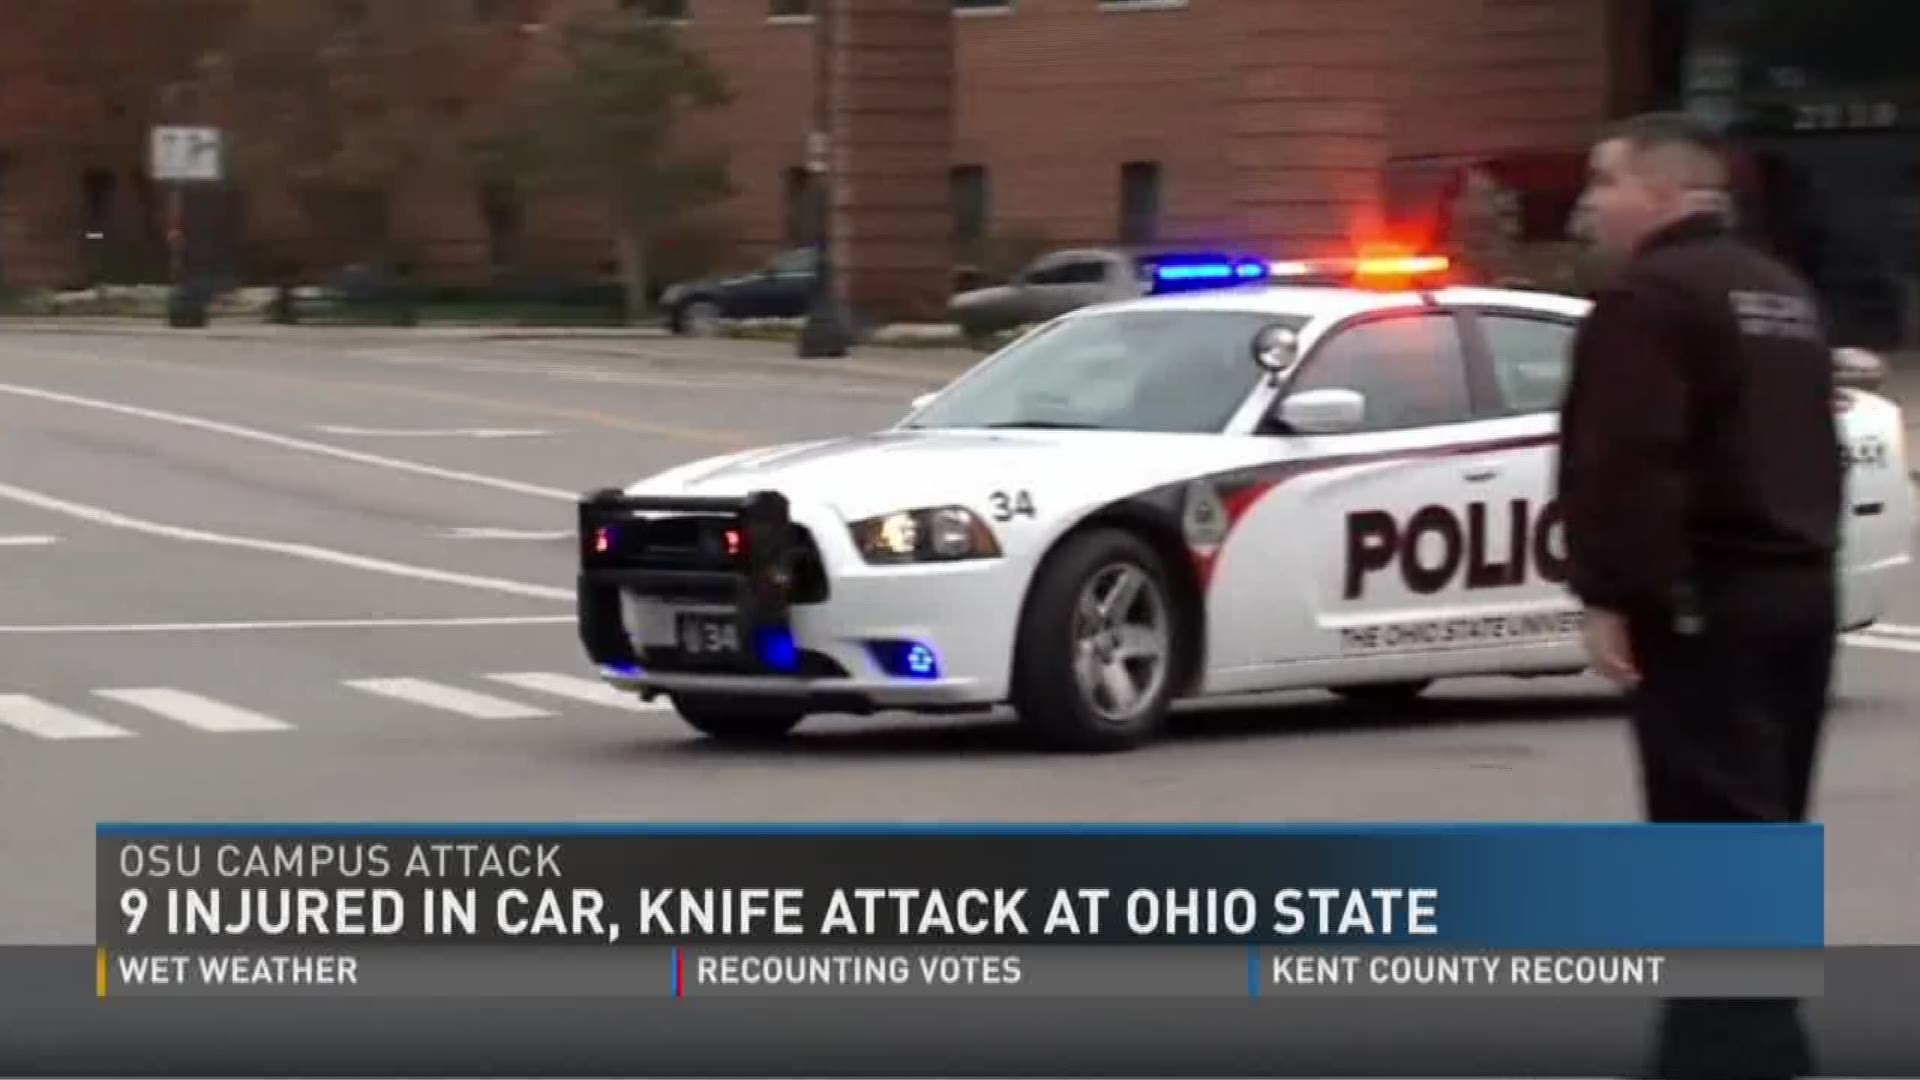 Investigators say the Ohio State University student who intentionally ran into people on the campus then began stabbing others is dead.